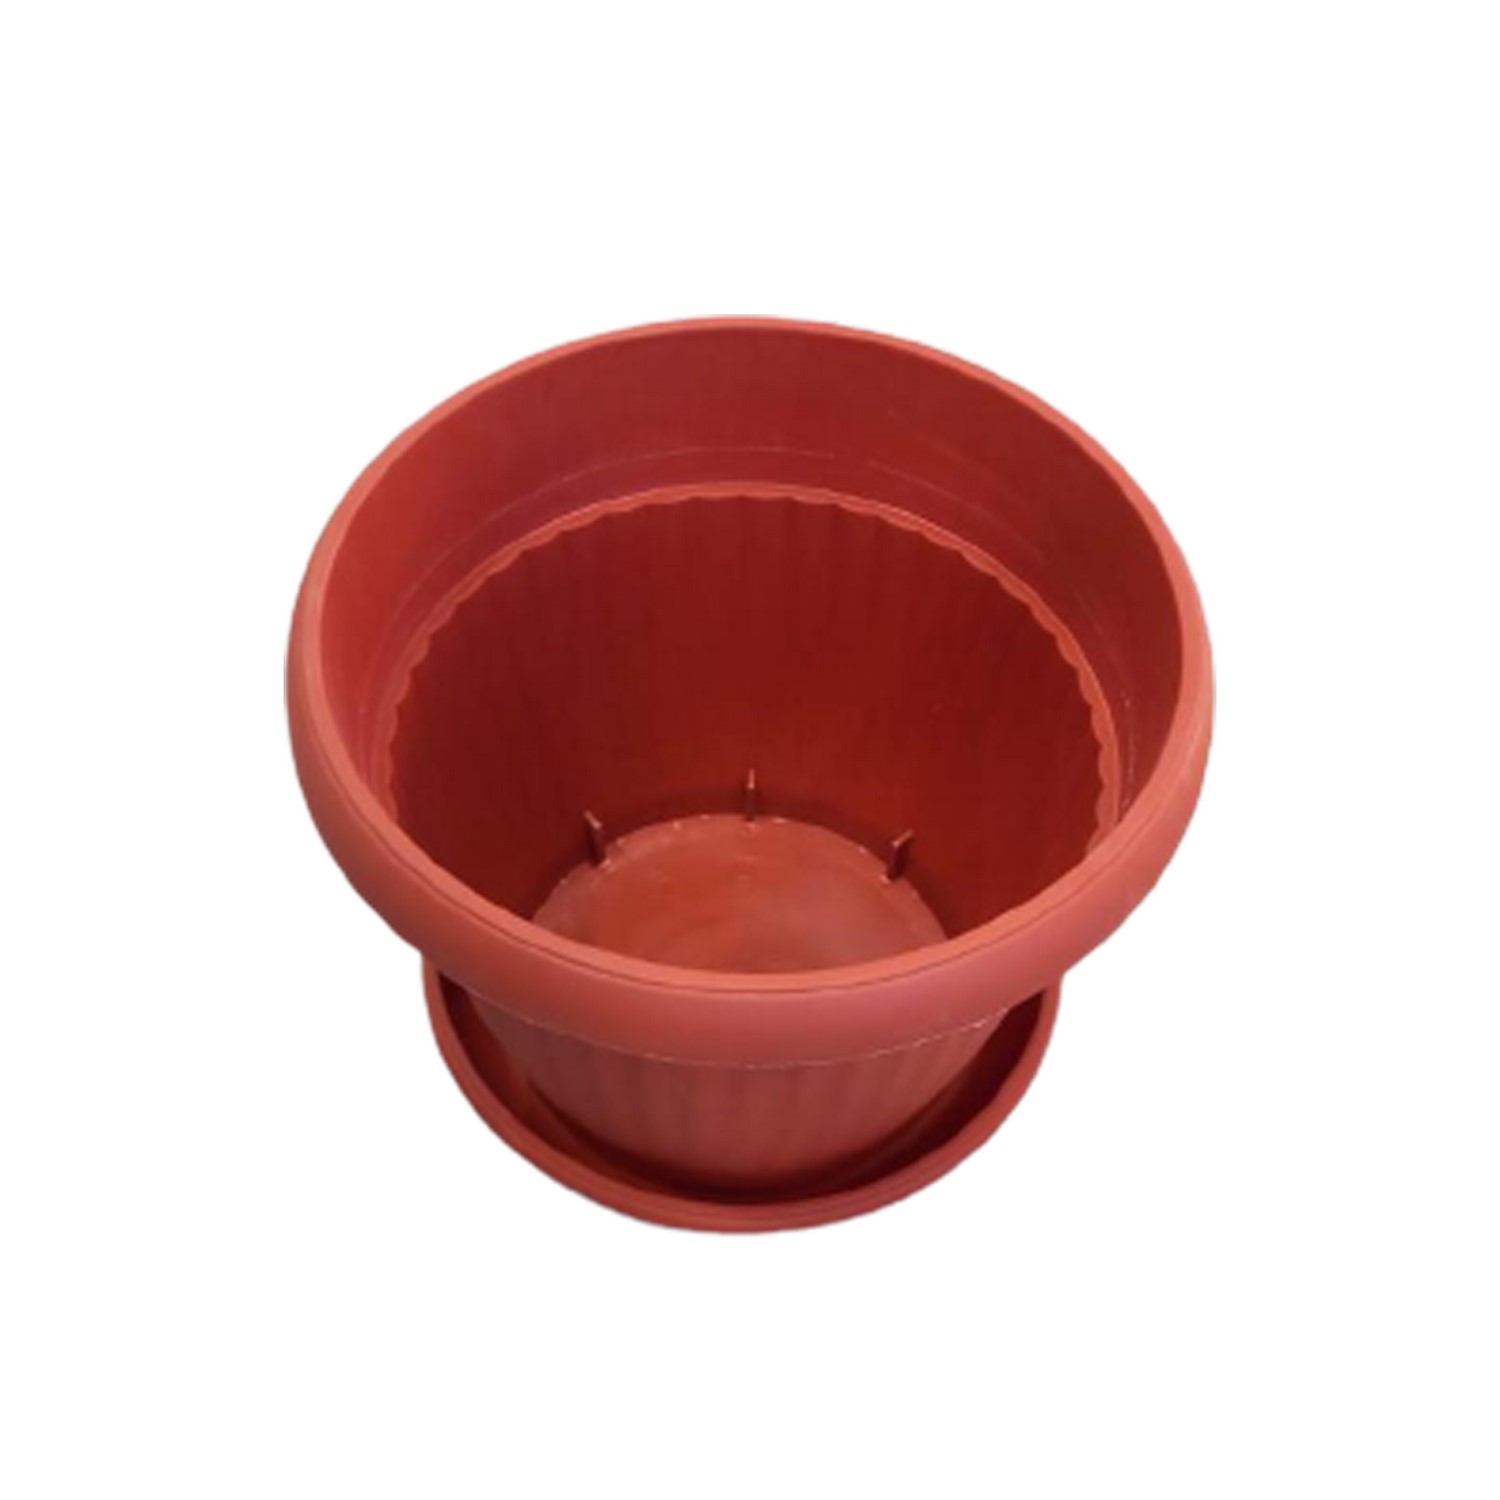 Buy Italian Pot with Base - 40cm - White Online | Agriculture Gardening Tools | Qetaat.com